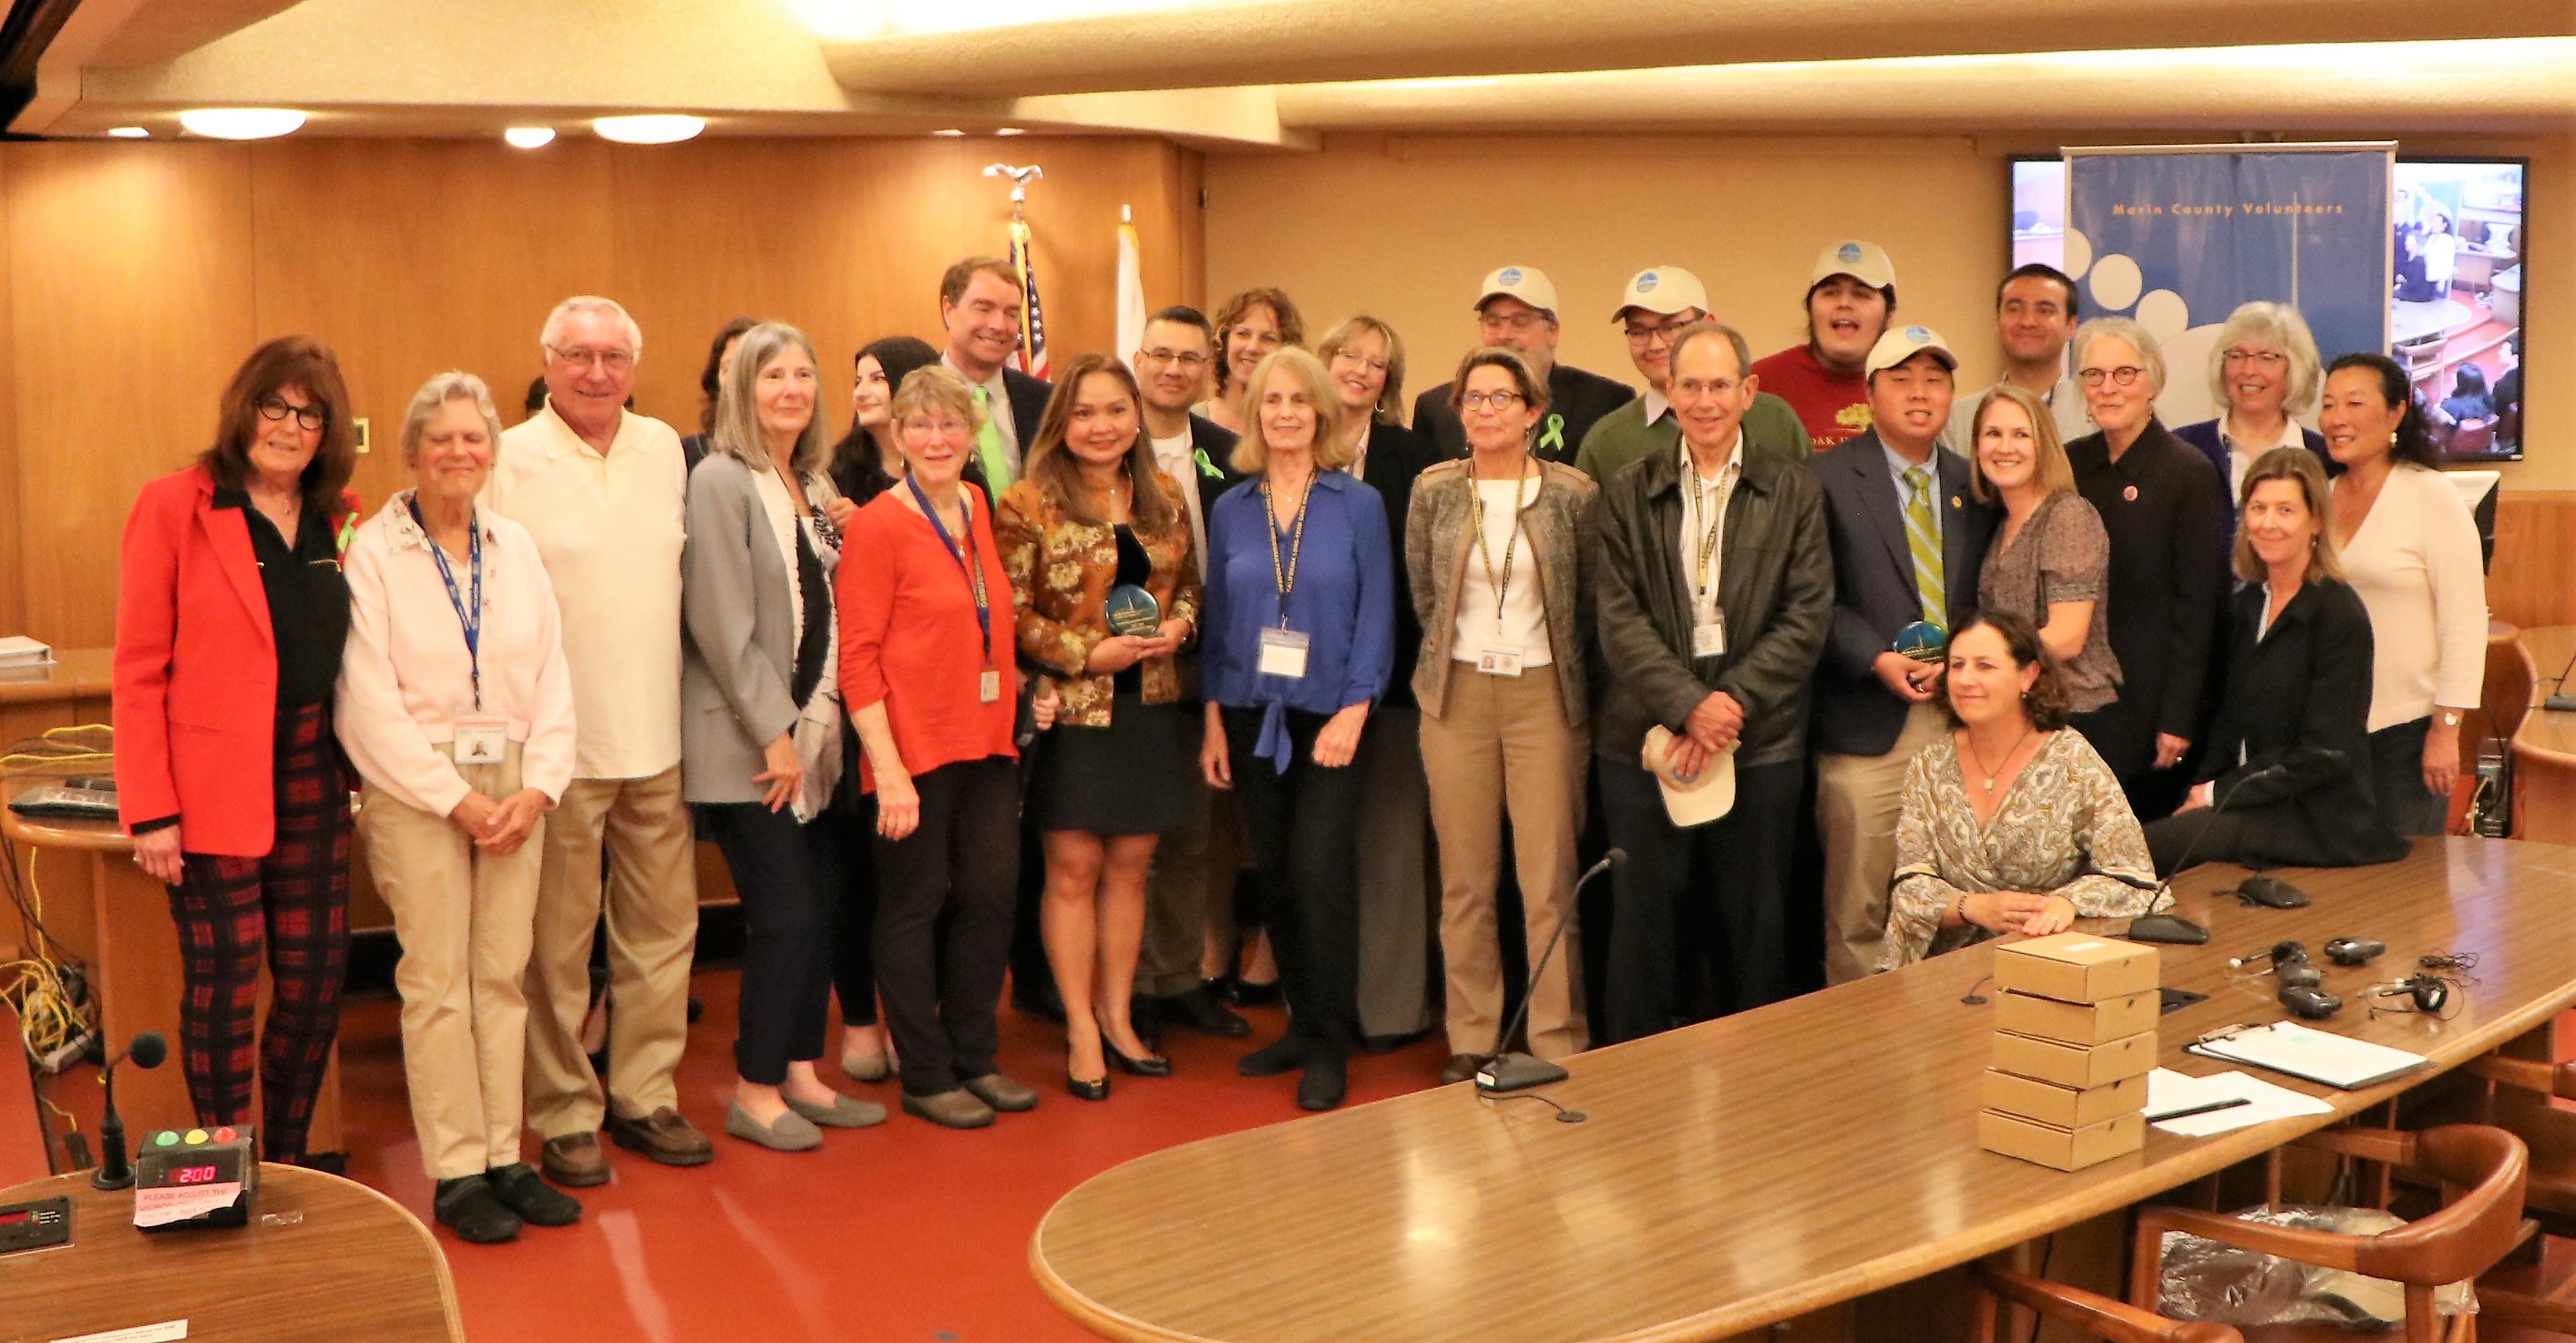 A group of about 25 volunteers and interns gather for a photo during the Board of Supervisors meeting.